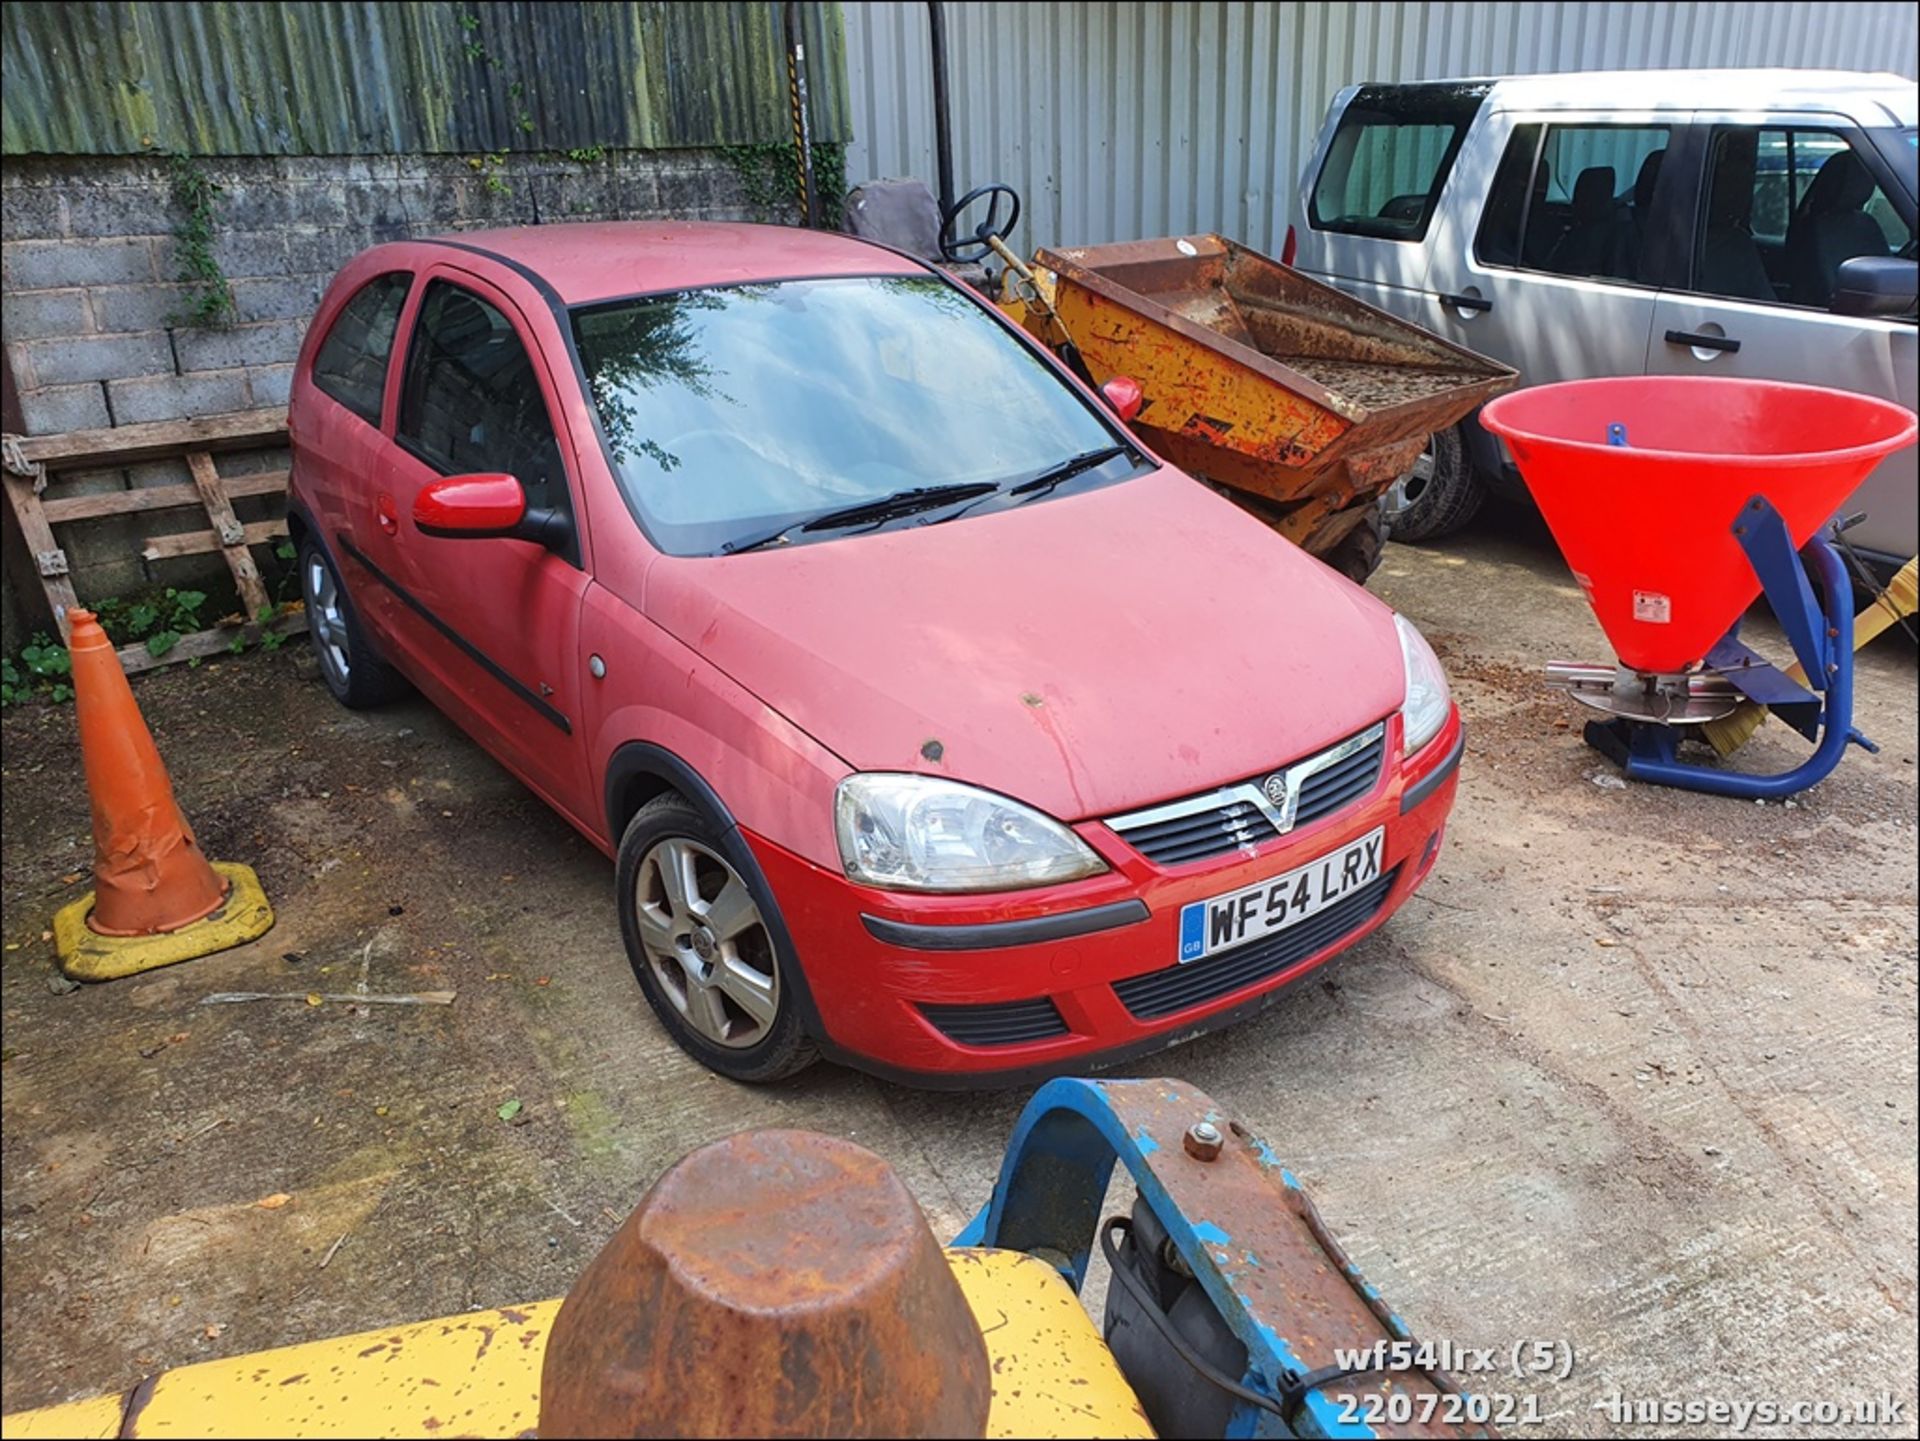 04/54 VAUXHALL CORSA ENERGY TWINPORT - 998cc 3dr Hatchback (Red, 61k) - Image 6 of 16